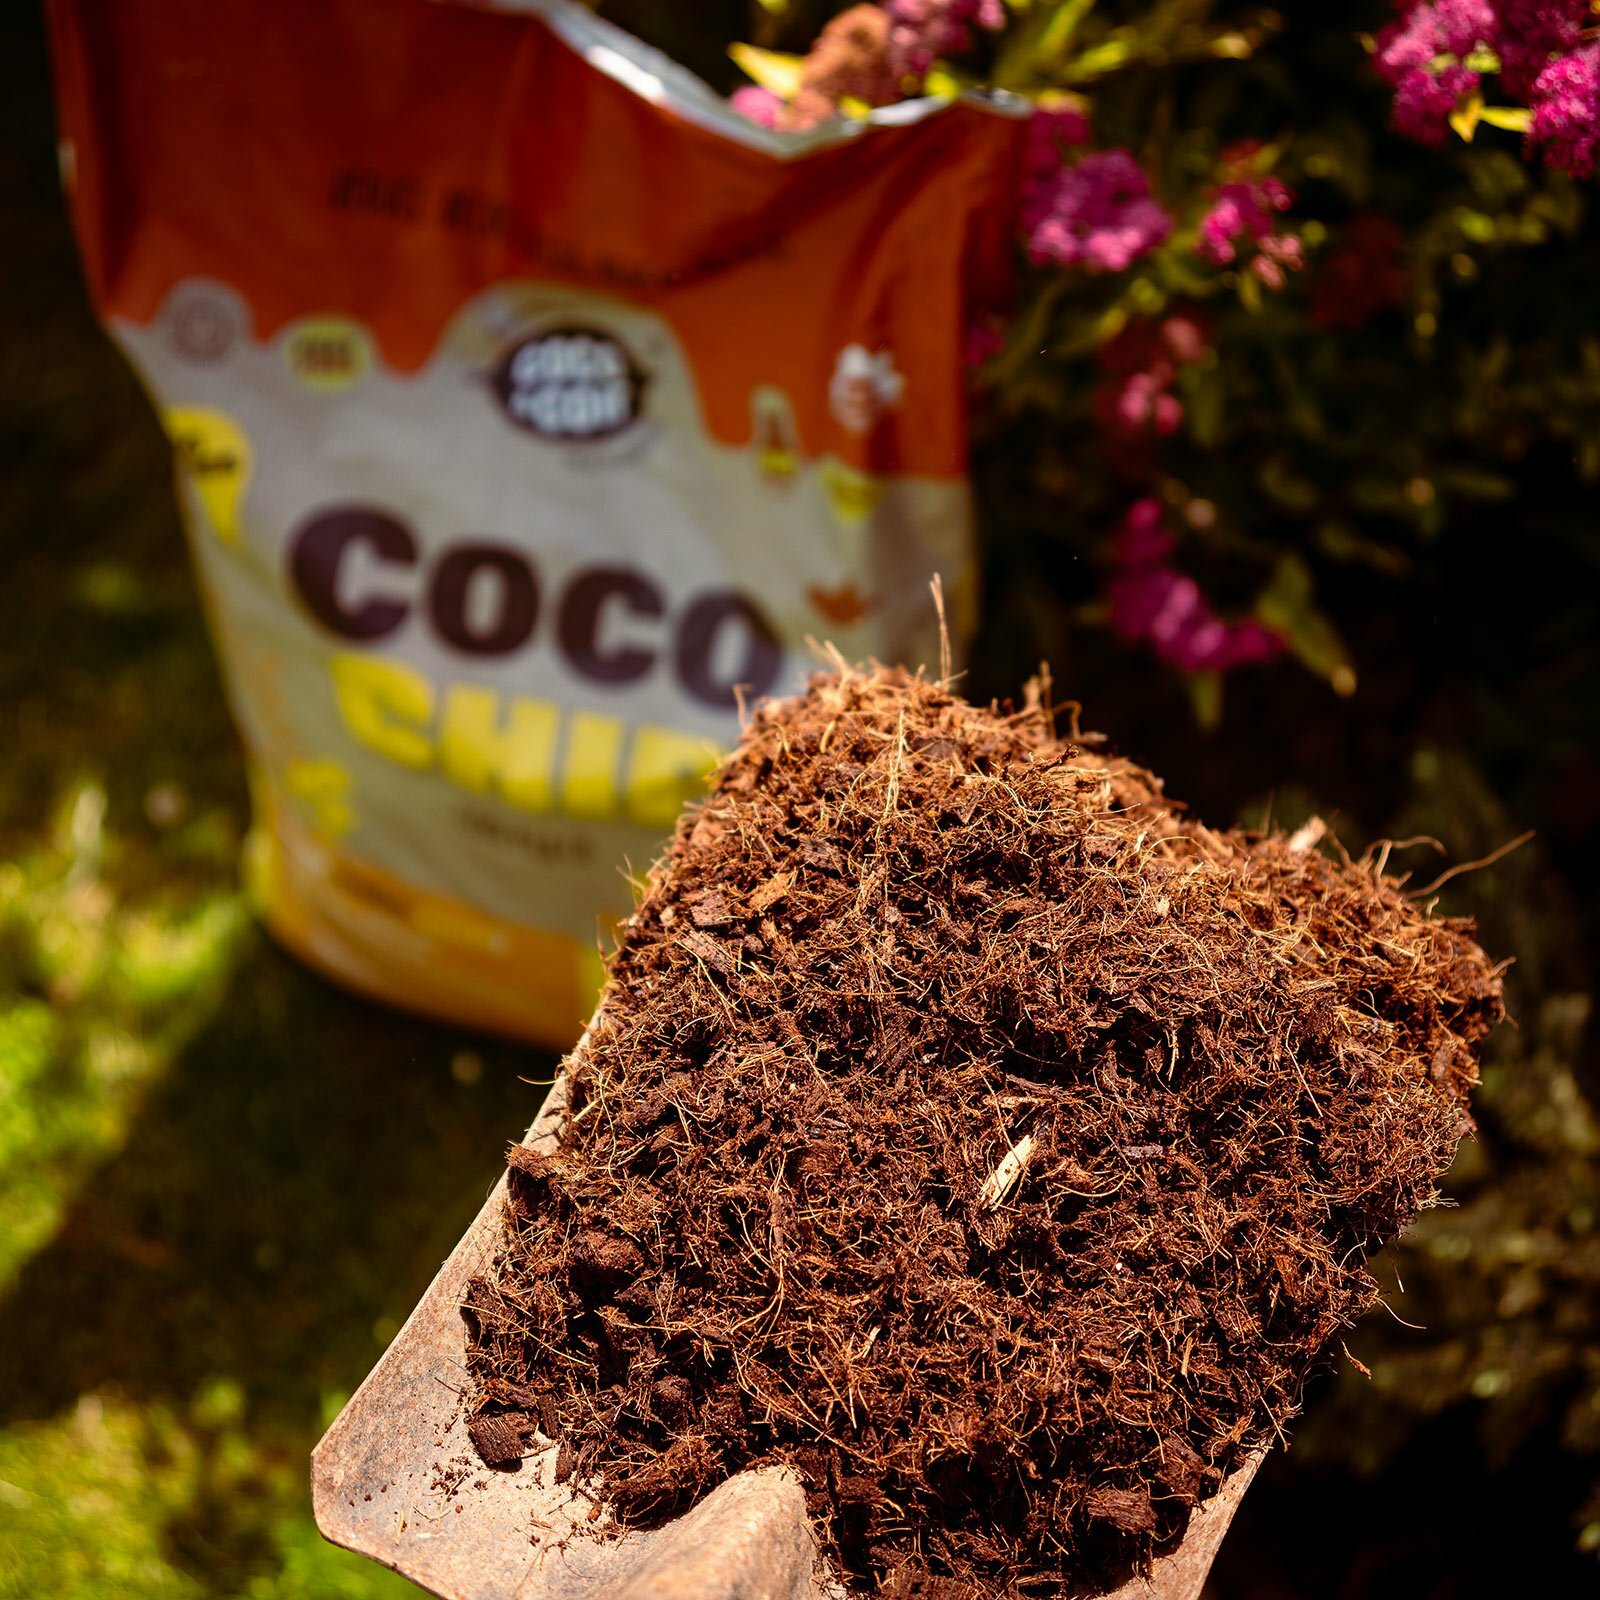 coco chip mulch contents on spade